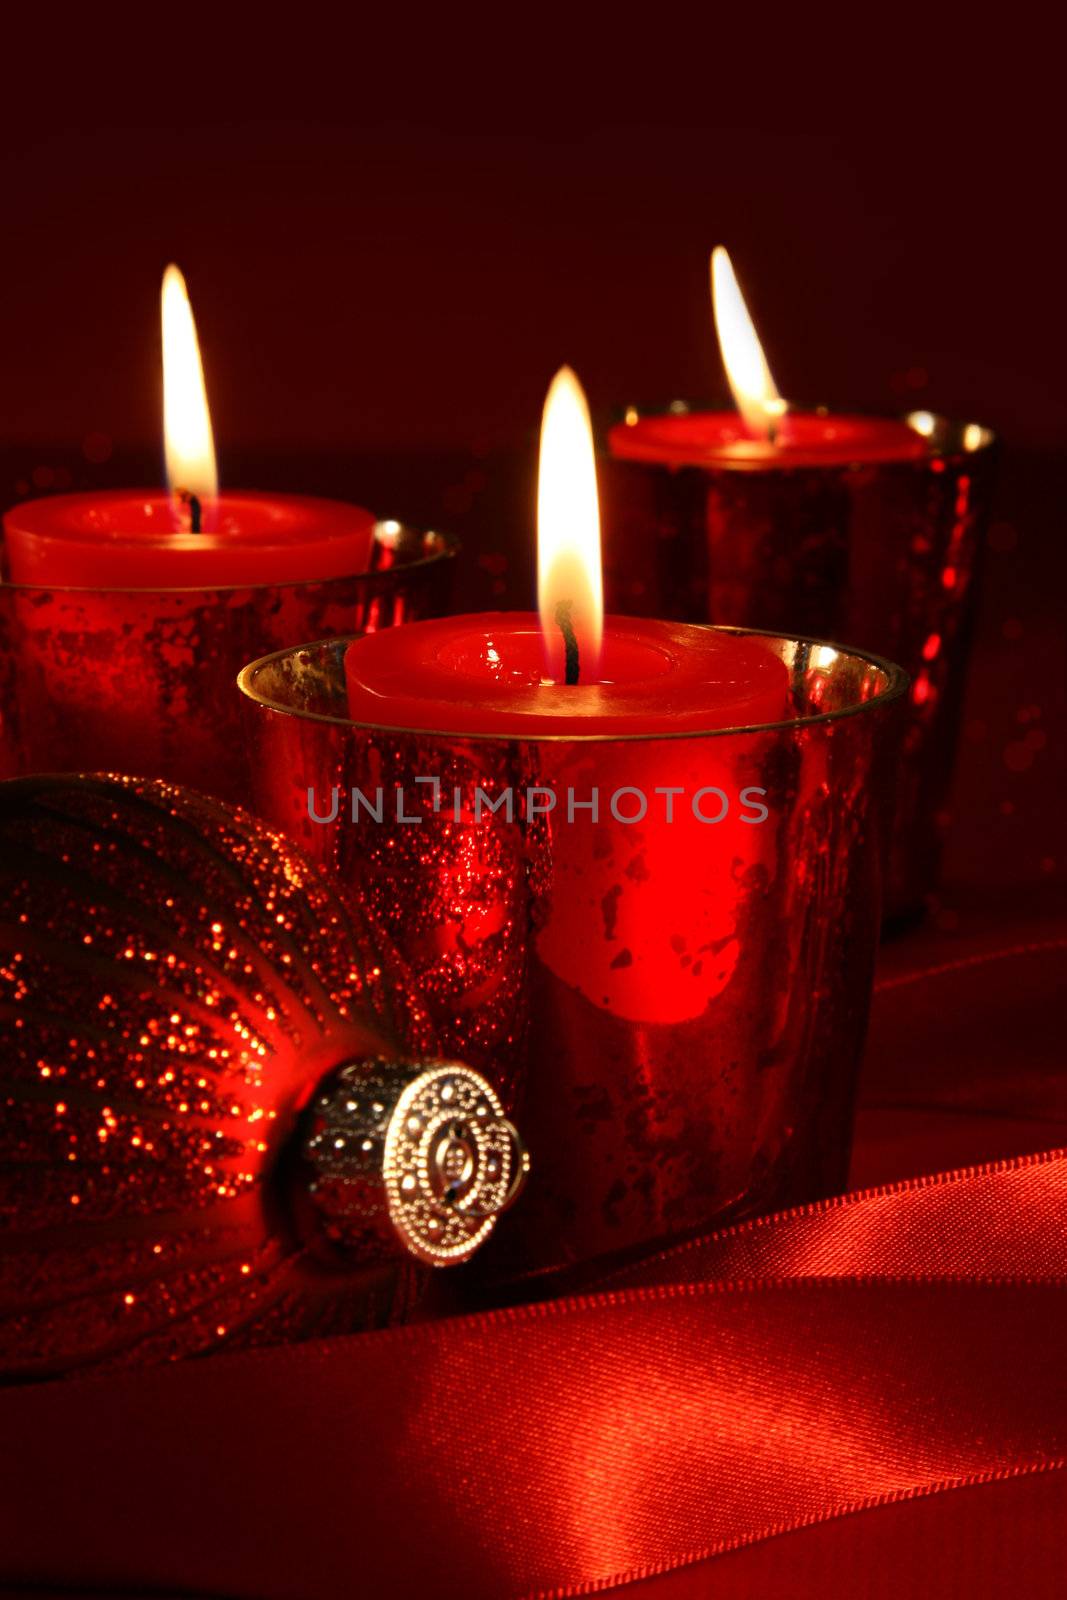 Red candles with ribbons against a background